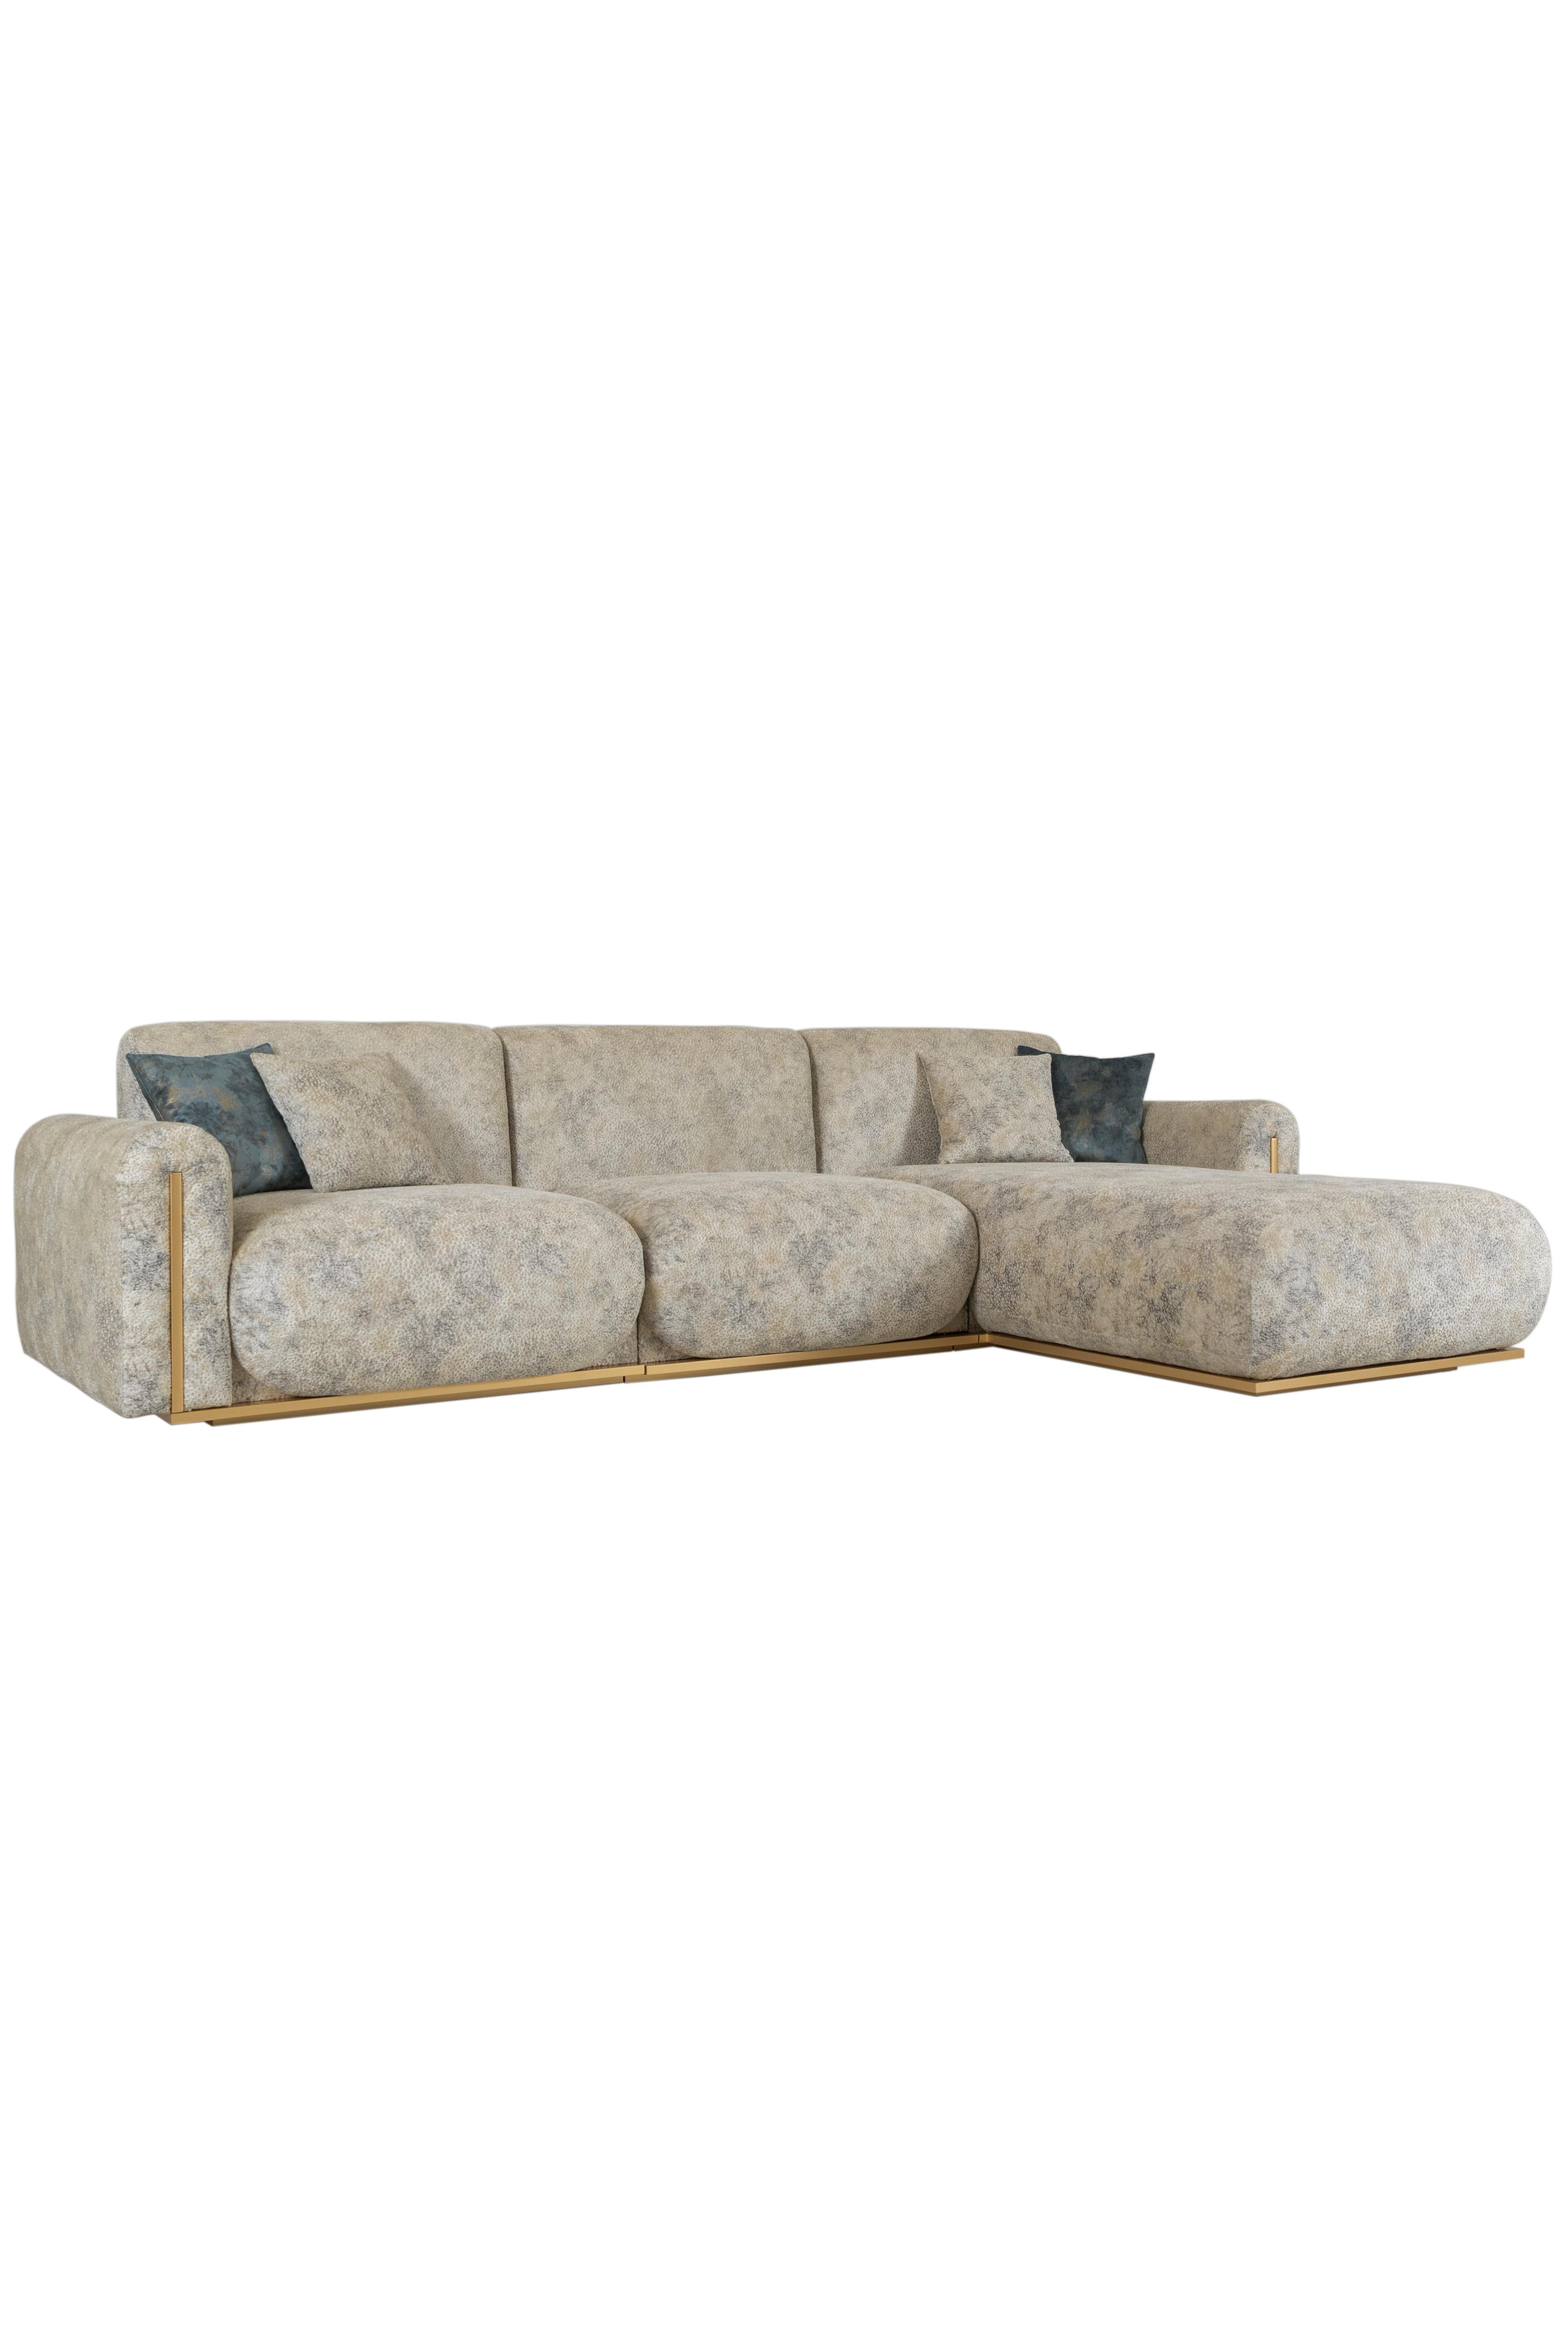 Beijinho Sofa, Contemporary Collection, Handcrafted in Portugal - Europe by Greenapple.

The Beijinho leather sofa seamlessly combines the soft texture of high-quality leather and enveloping, tufted comfort, creating a sensory experience reminiscent